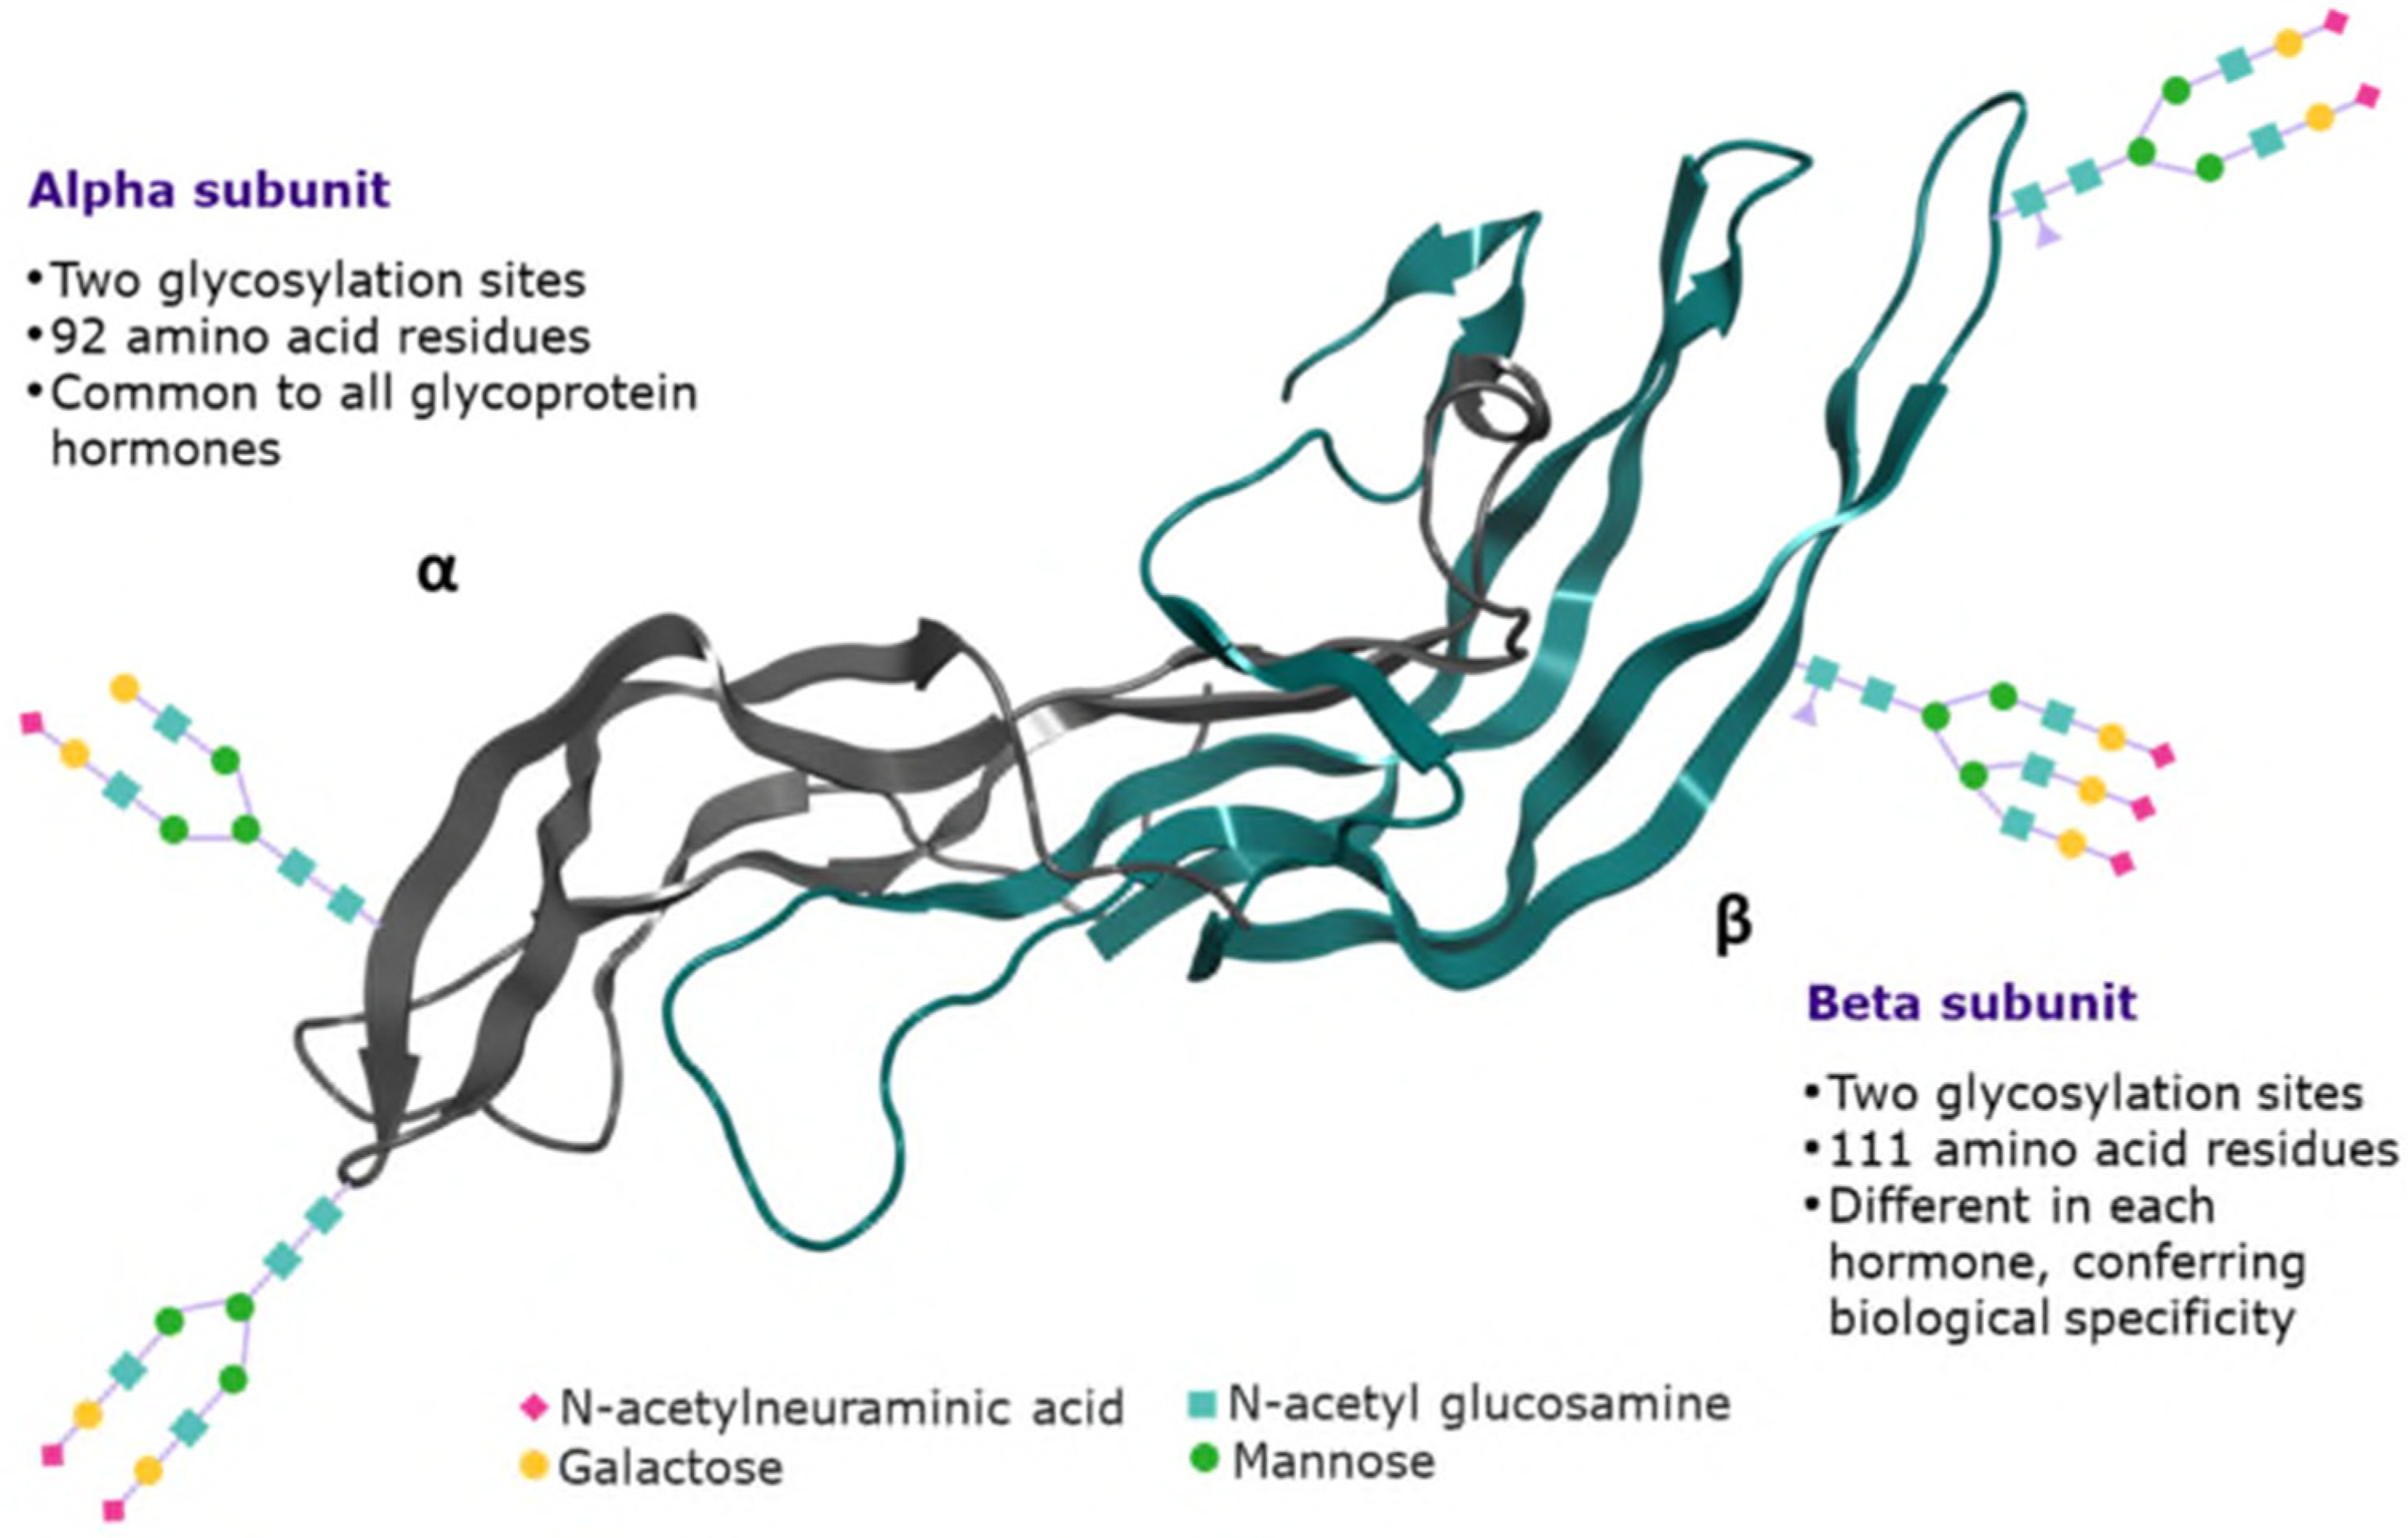 IJMS | Free Full-Text | Comparative Assessment of the Structural Features  of Originator Recombinant Human Follitropin Alfa Versus Recombinant Human  Follitropin Alfa Biosimilar Preparations Approved in Non-European Regions